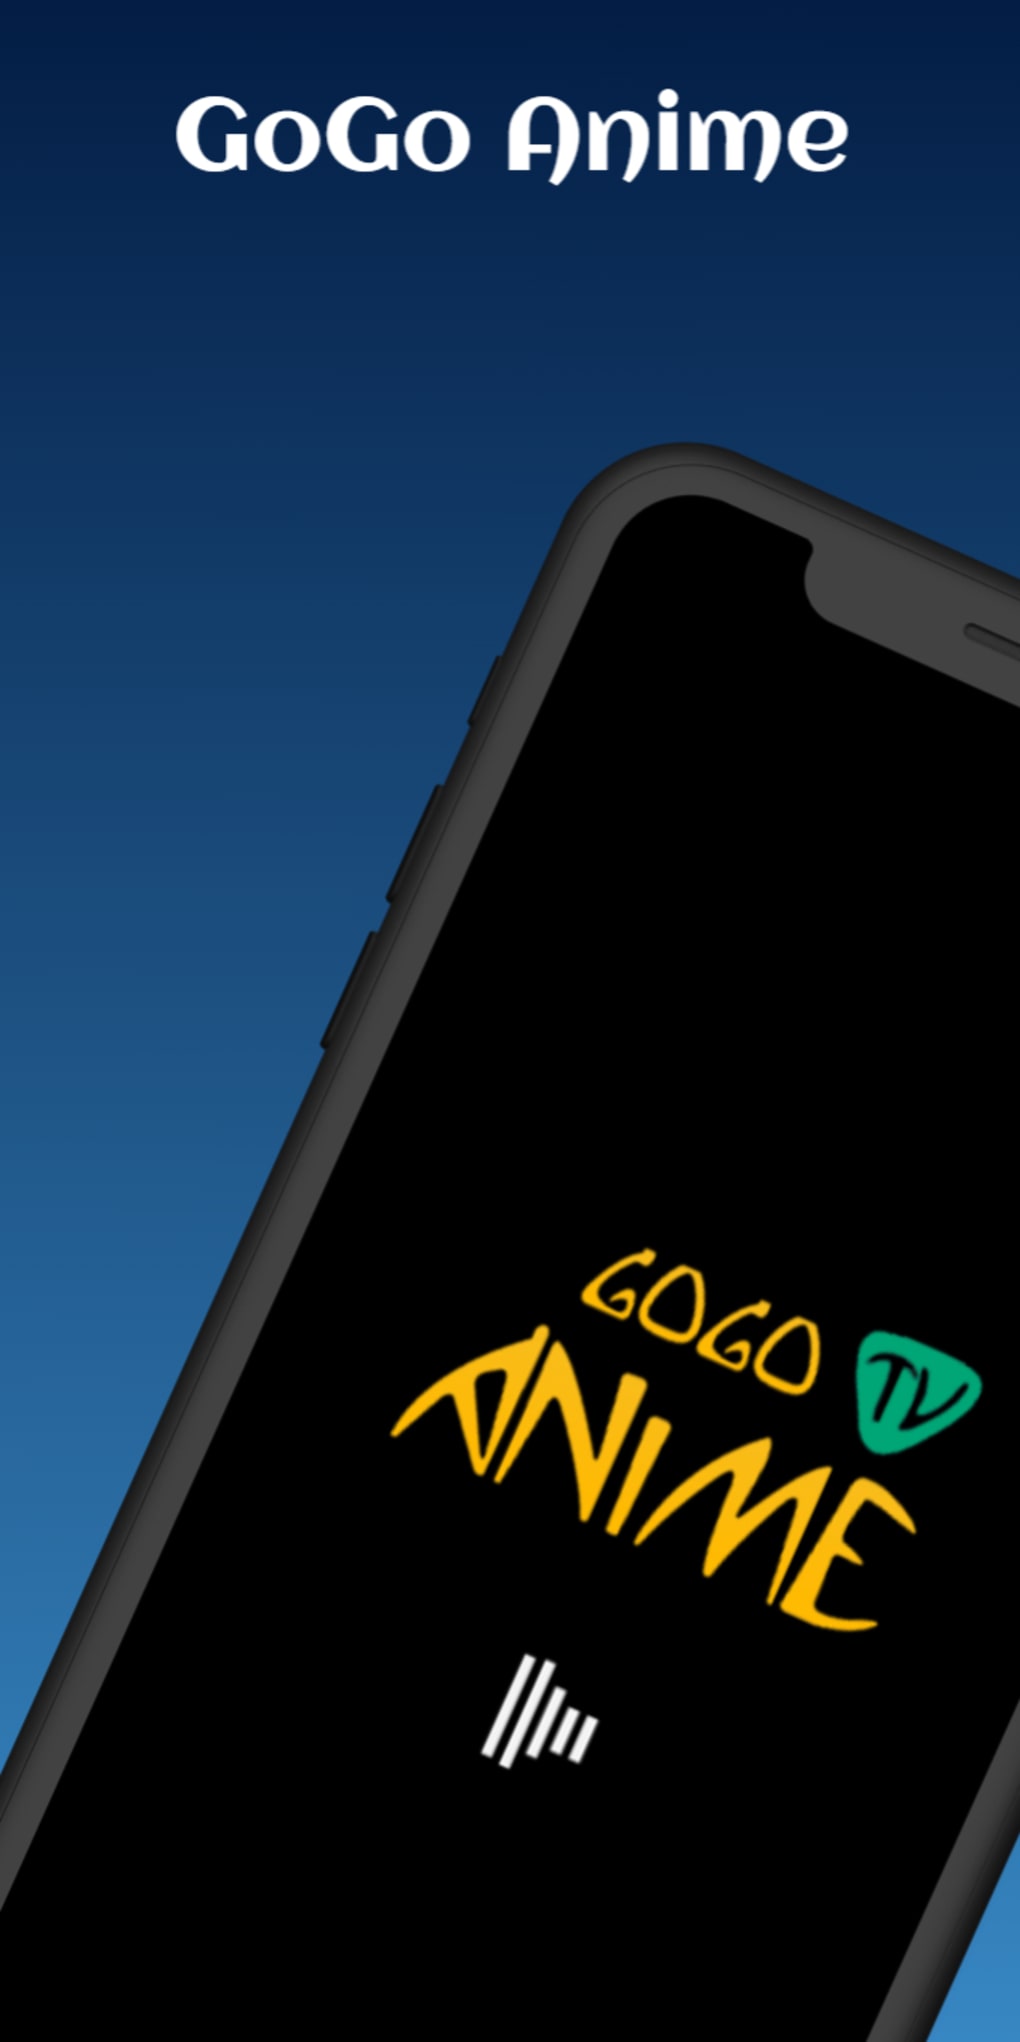 GoGoanime IOS App: How To Download On IPhone In 3 Easy Steps